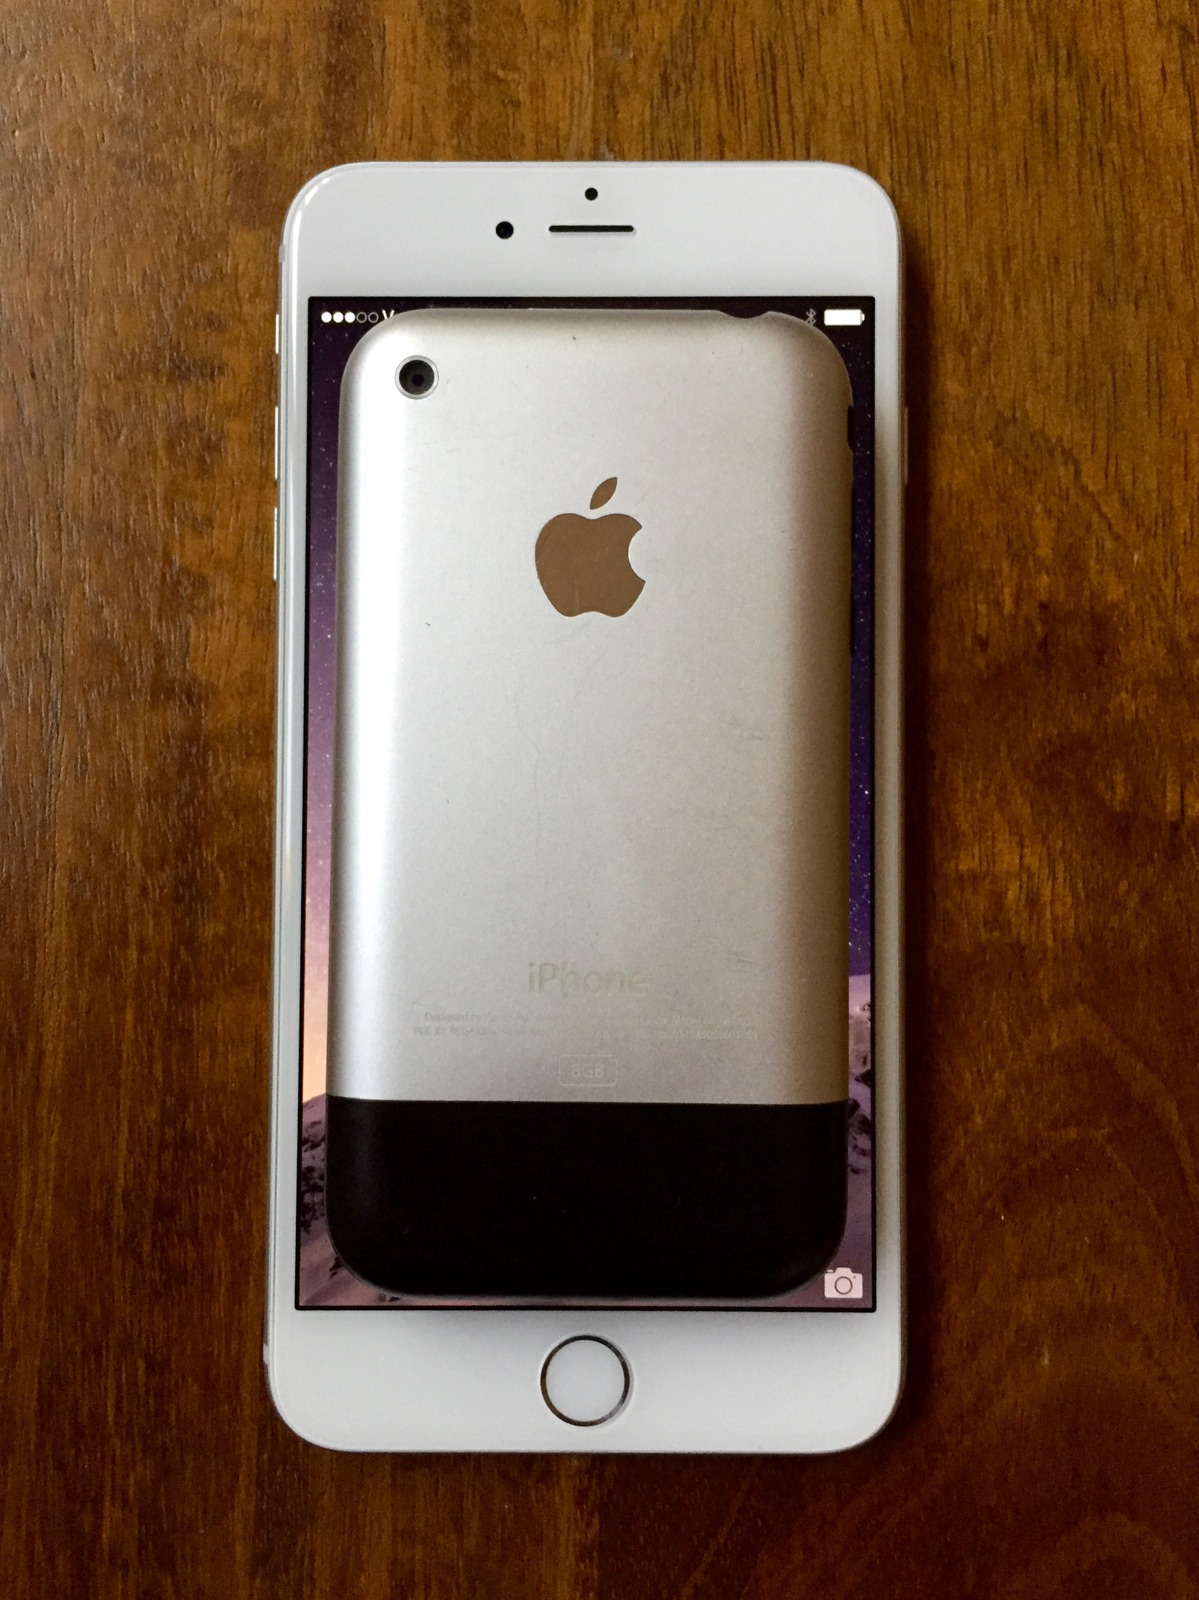 An original 2007 iPhone fits entirely within the display, just the display, of an iPhone 6 Plus.